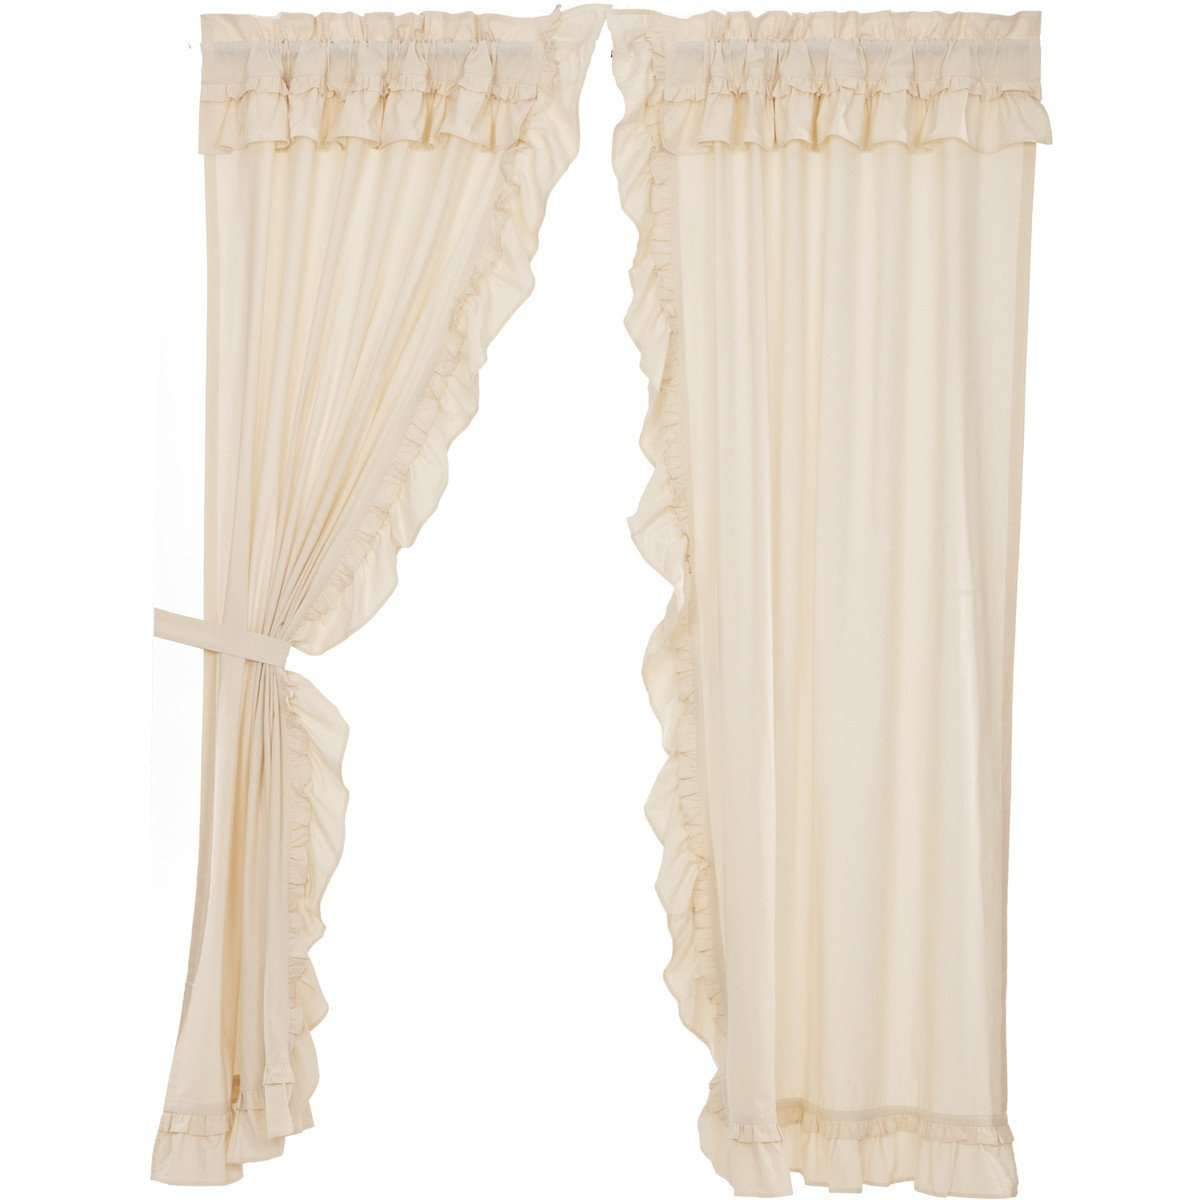 Muslin Ruffled Unbleached Natural Panel Curtain Set of 2 84"x40" VHC Brands - The Fox Decor